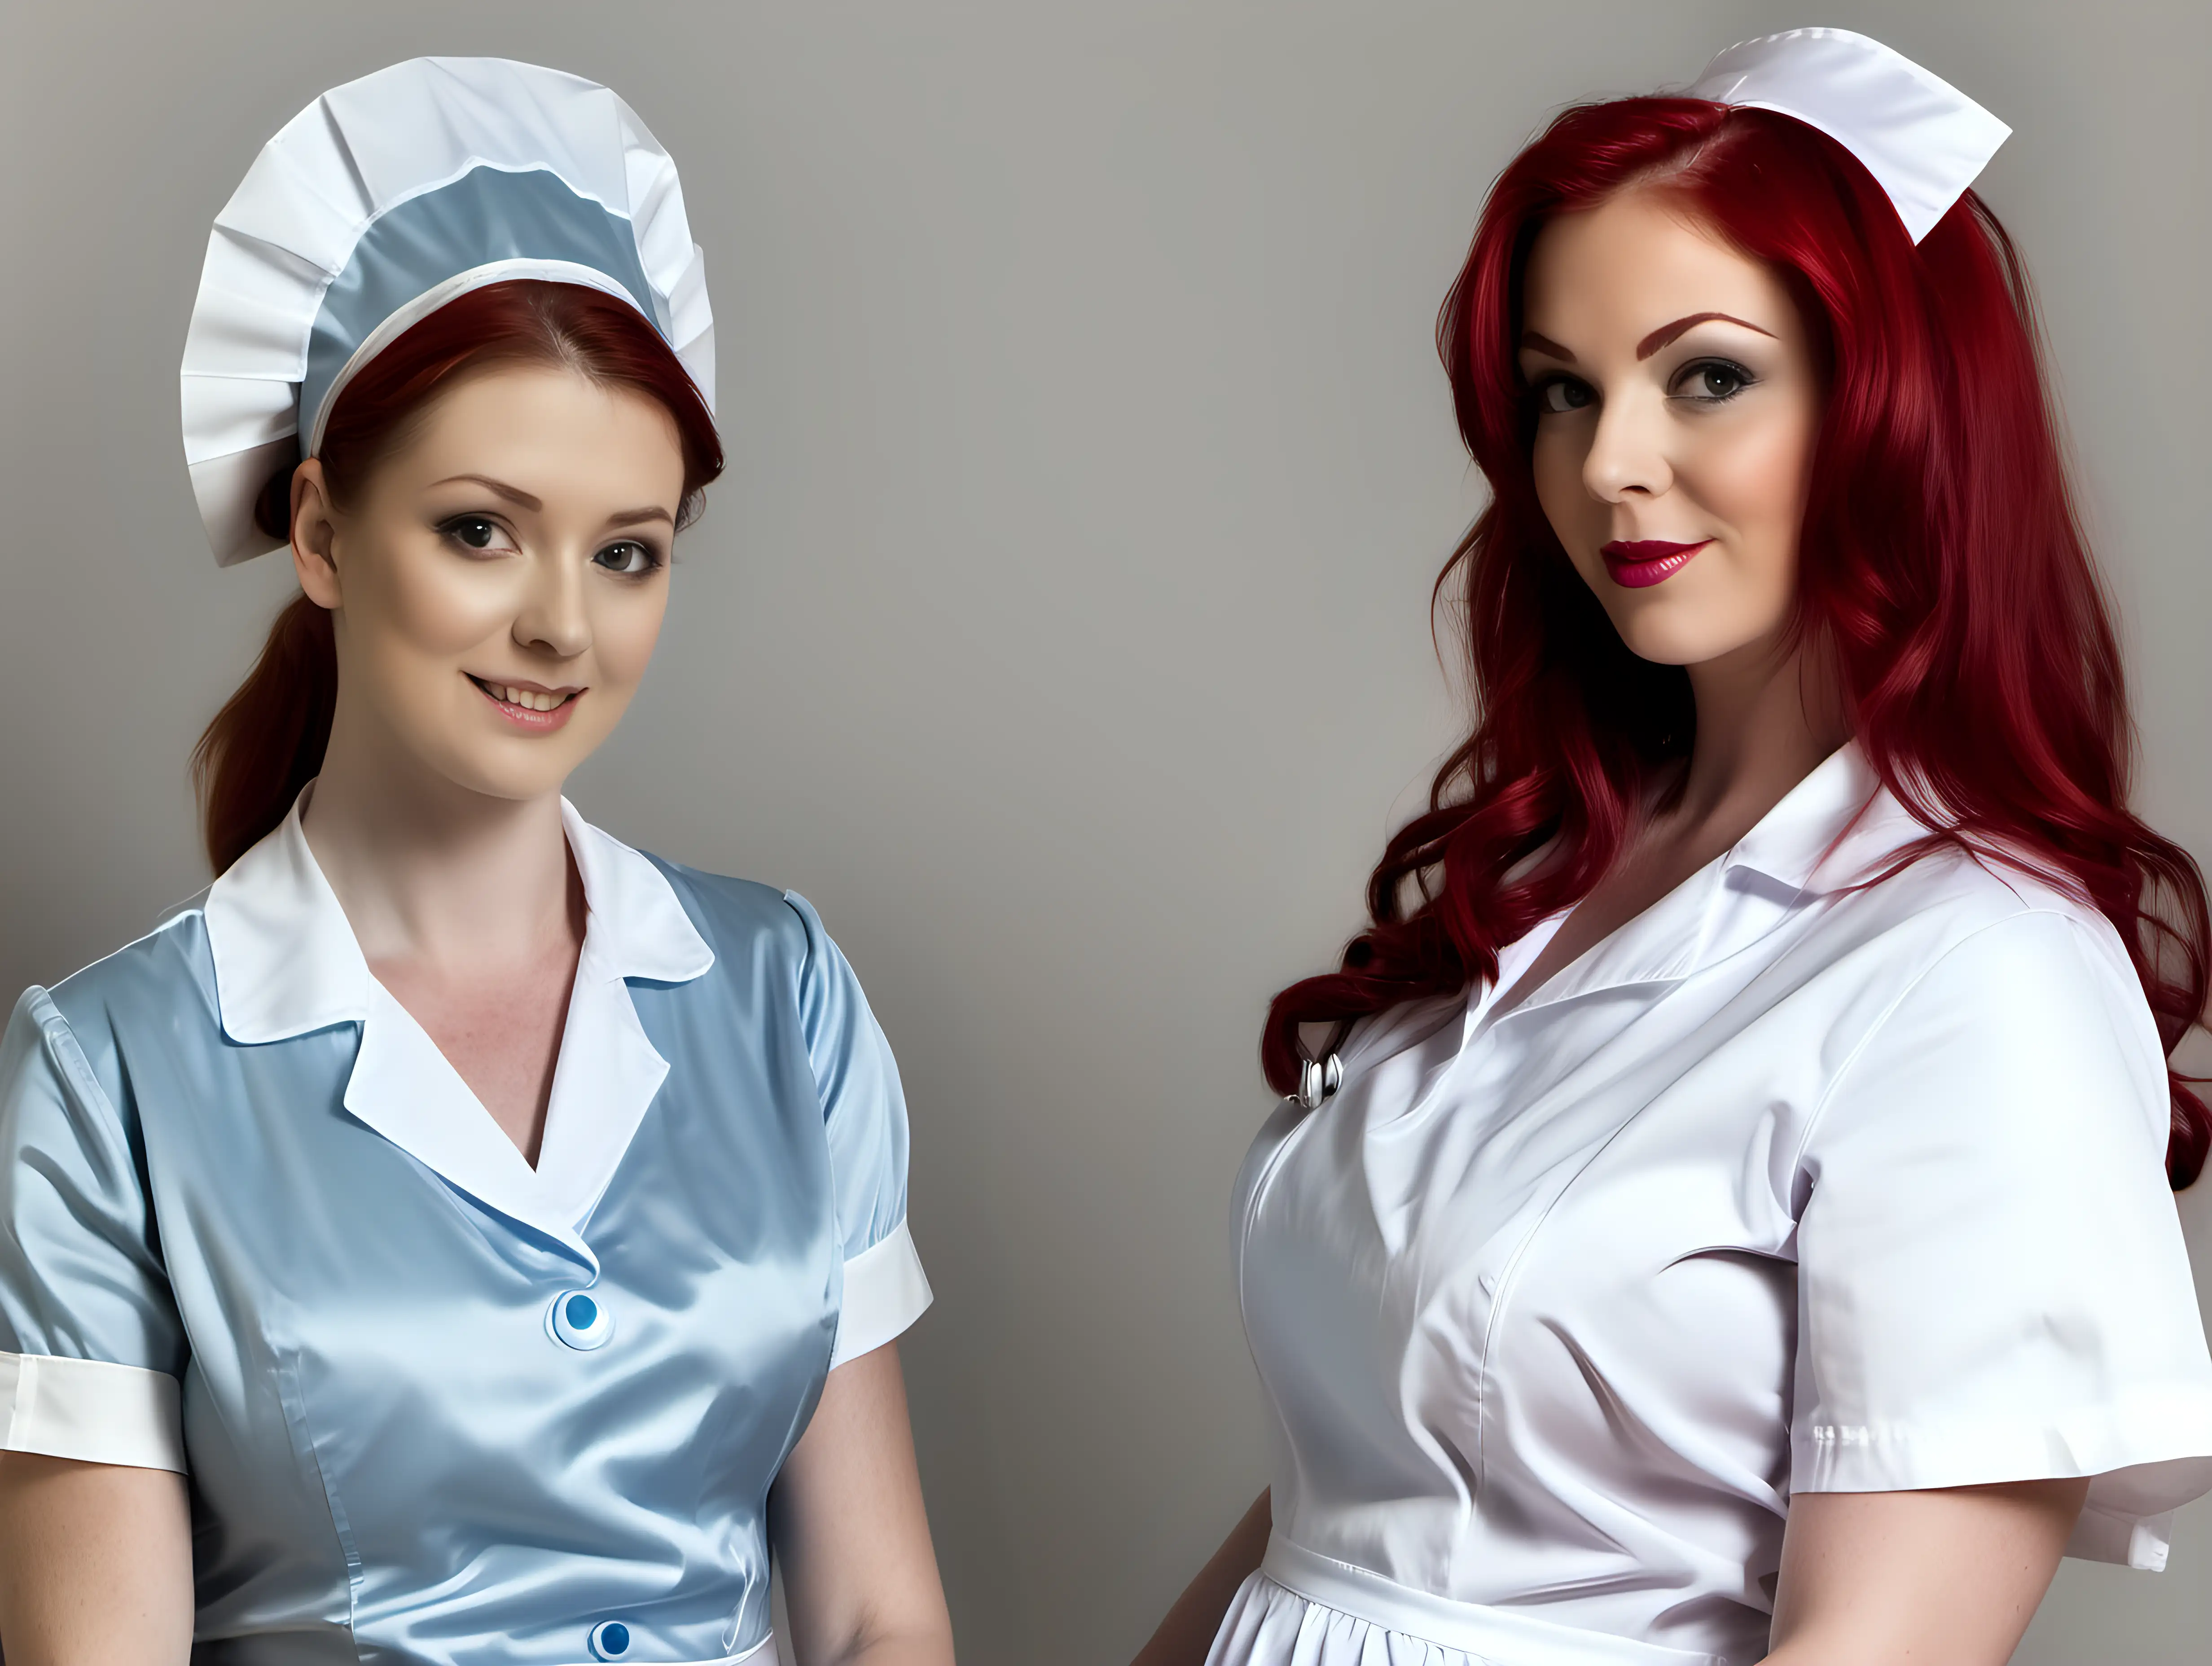 Charming Girl in Long Satin Nurse Uniforms with Mothers Fiery Red Hair